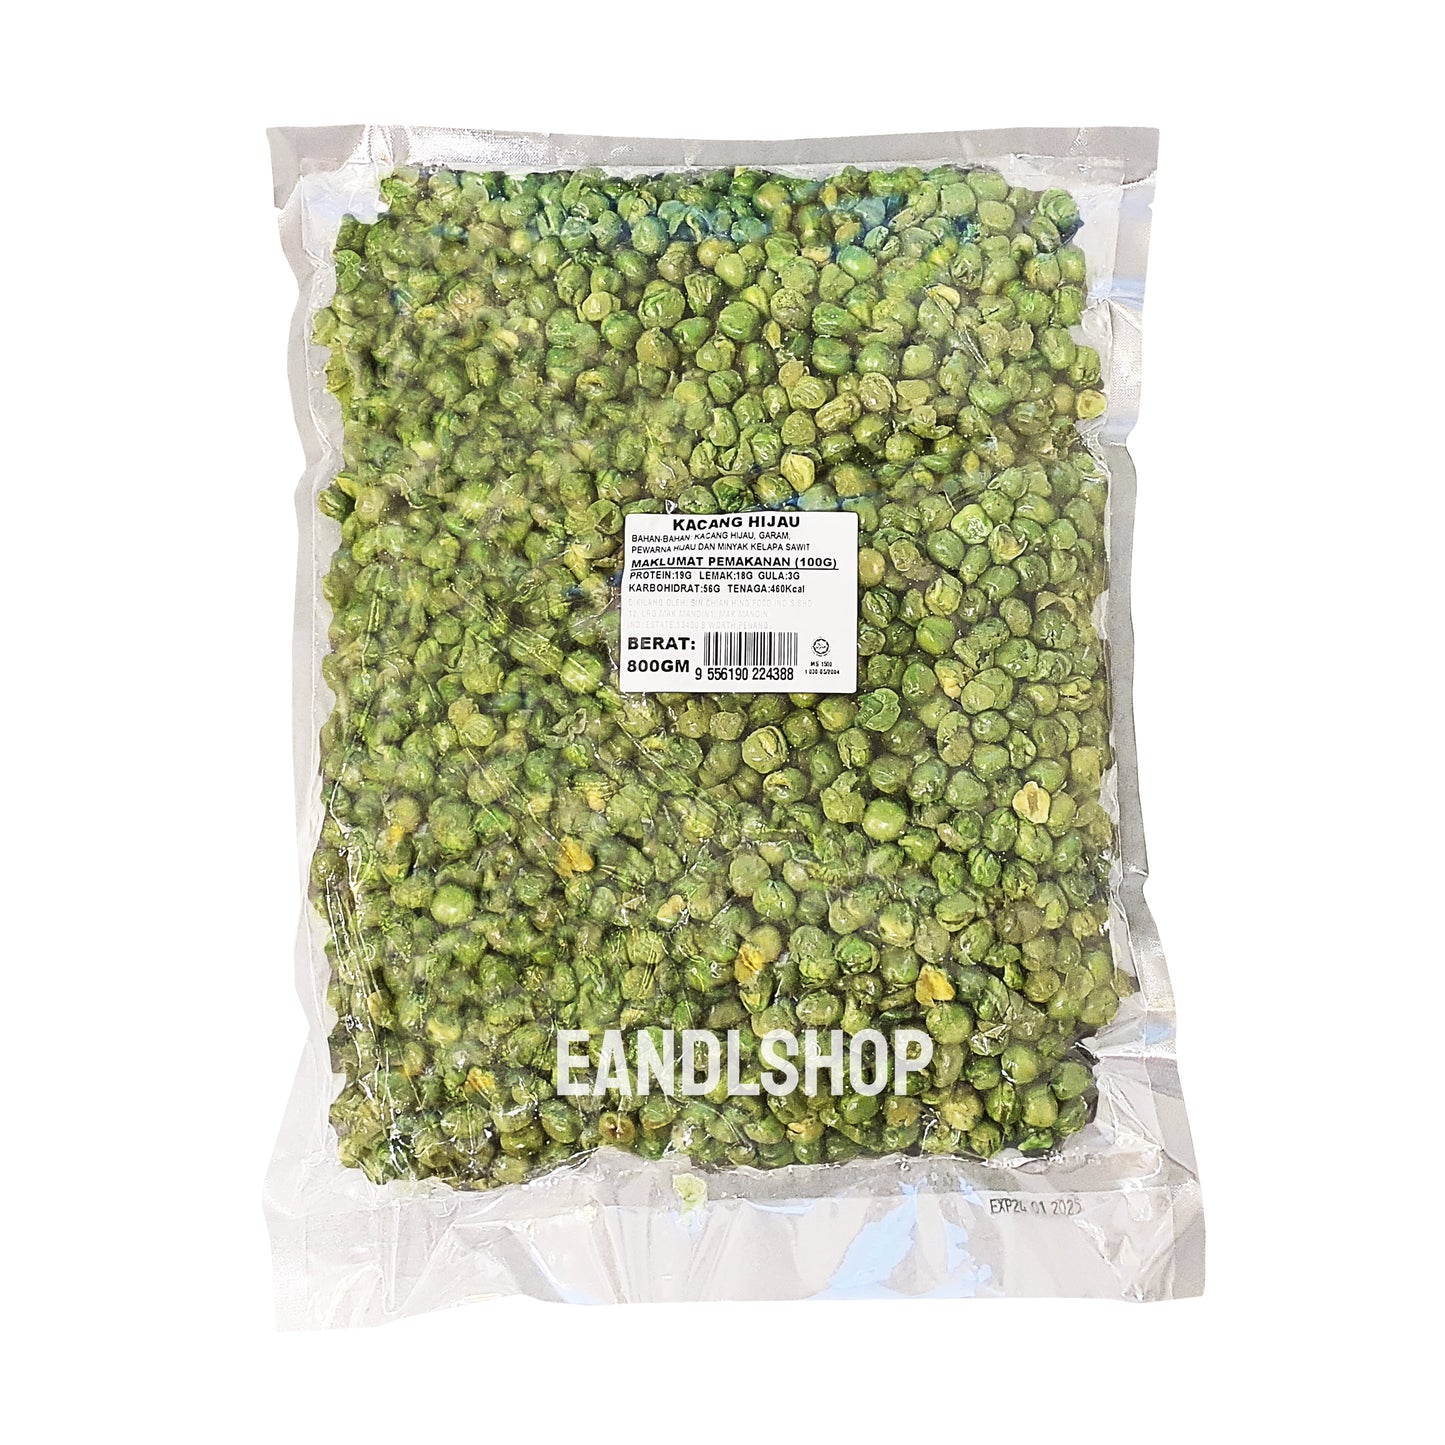 Green Peas . Old-school biscuits, modern snacks (chips, crackers), cakes, gummies, plums, dried fruits, nuts, herbal tea – available at www.EANDLSHOP.com